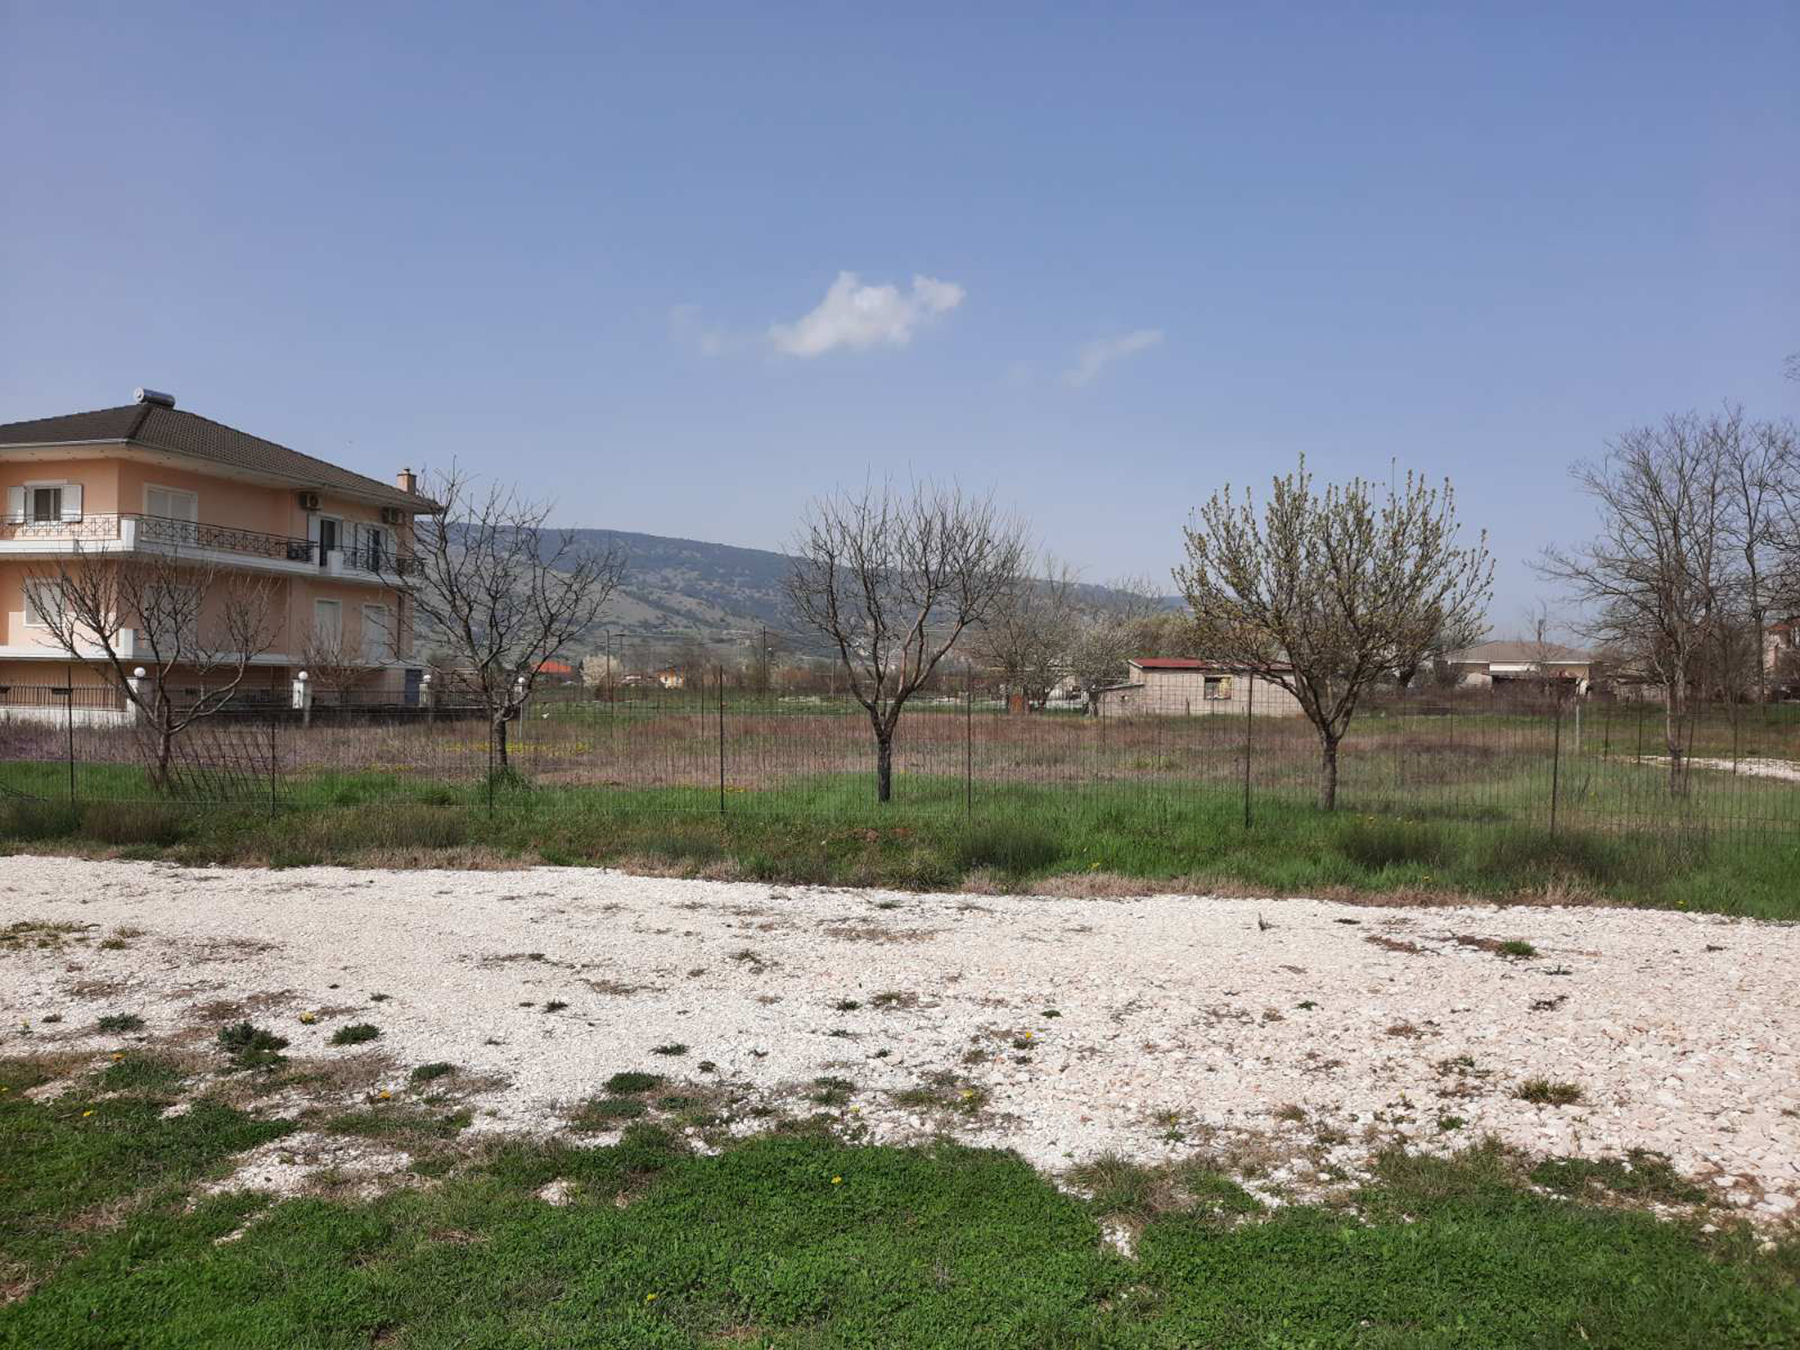 For sale corner plot of 420 sq.m. with S.D. 0.6 in the area of Seismoplikta in Ioannina near Papathoma Mekali